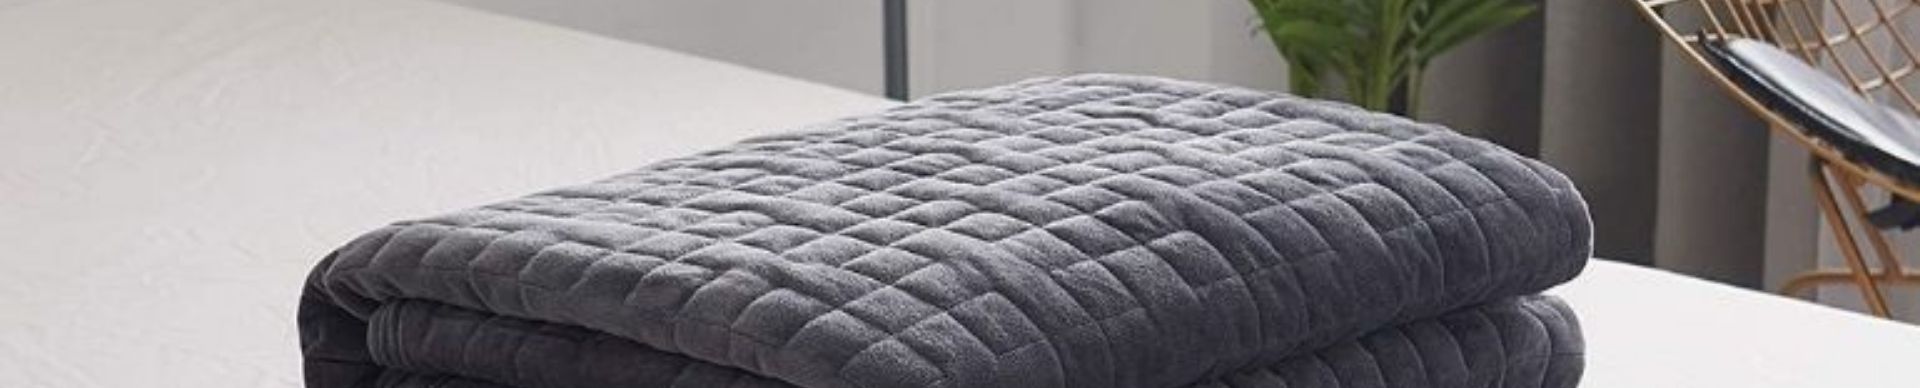 Best Weighted Blankets for Hot Sleepers